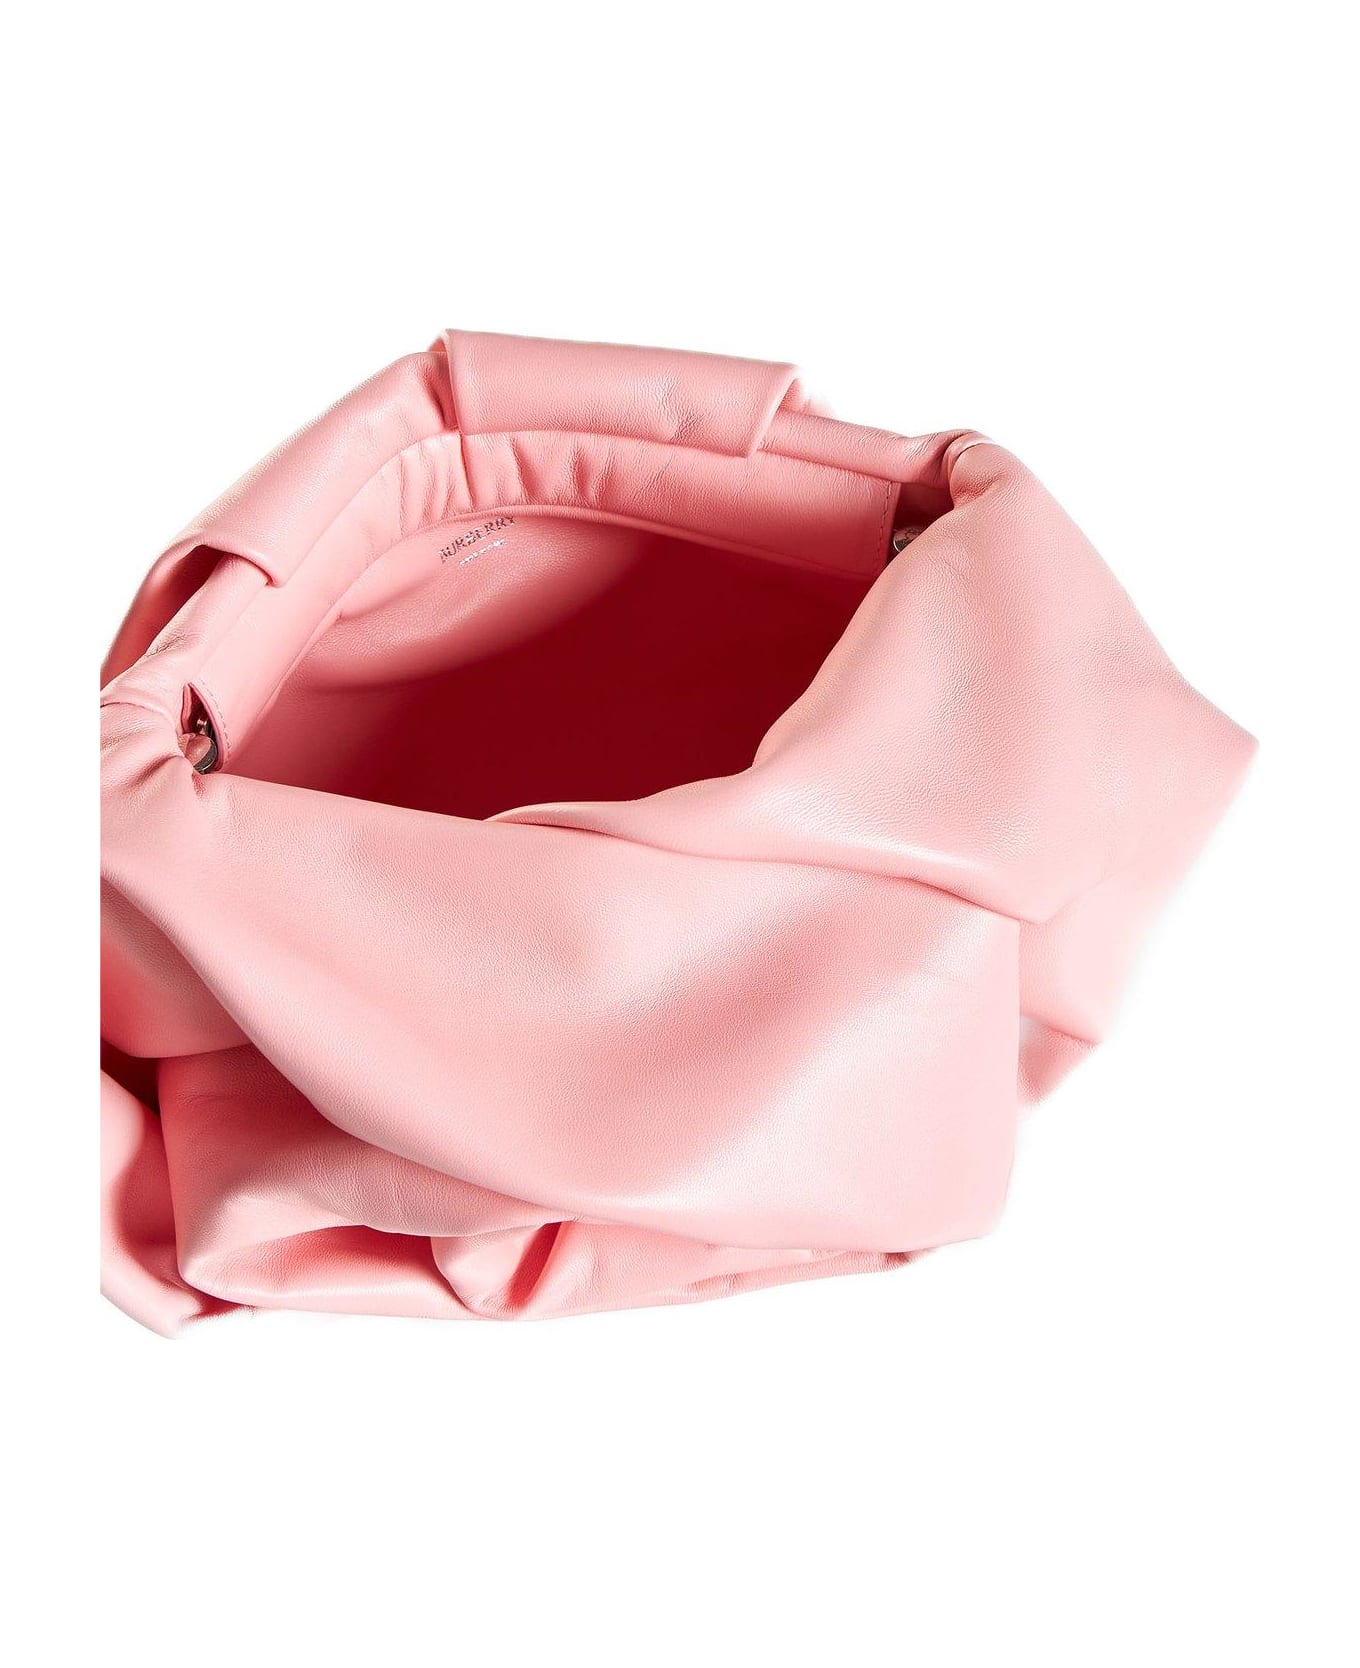 Burberry 3d Rose Ruched Clutch Bag - Candy